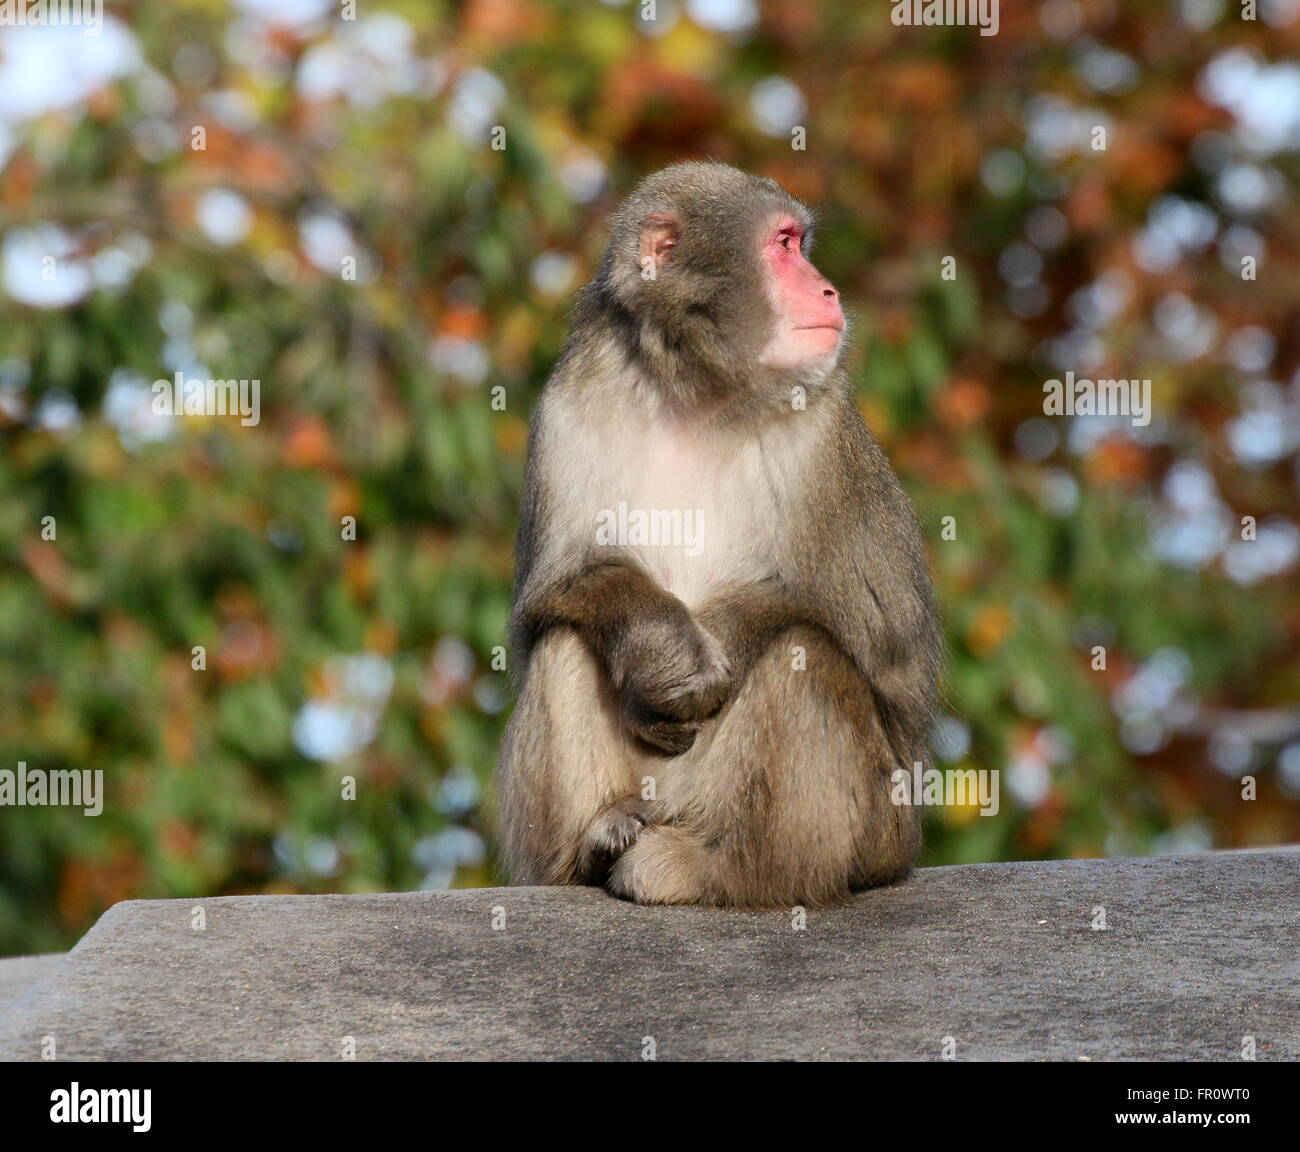 Japanese macaque or Snow monkey (Macaca fuscata) at Amsterdam Artis Zoo, The Netherlands Stock Photo